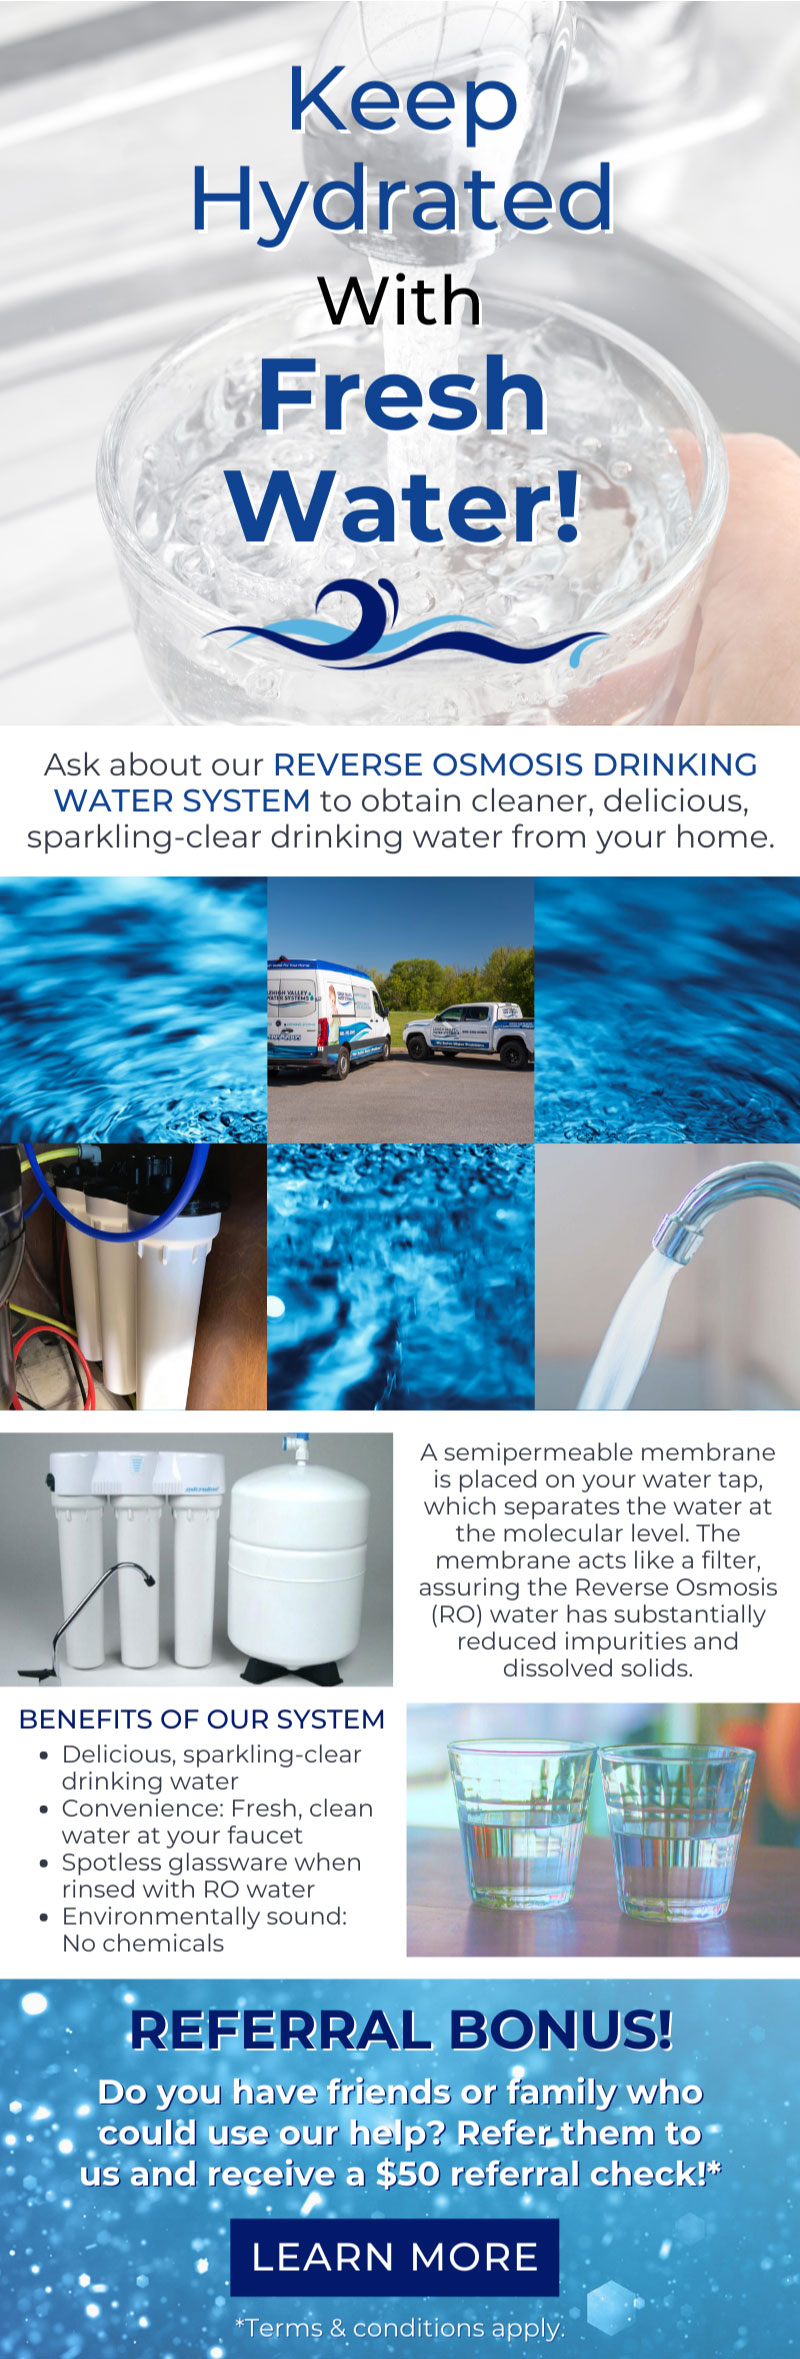 Keep Hydrated With Fresh Water Infographic